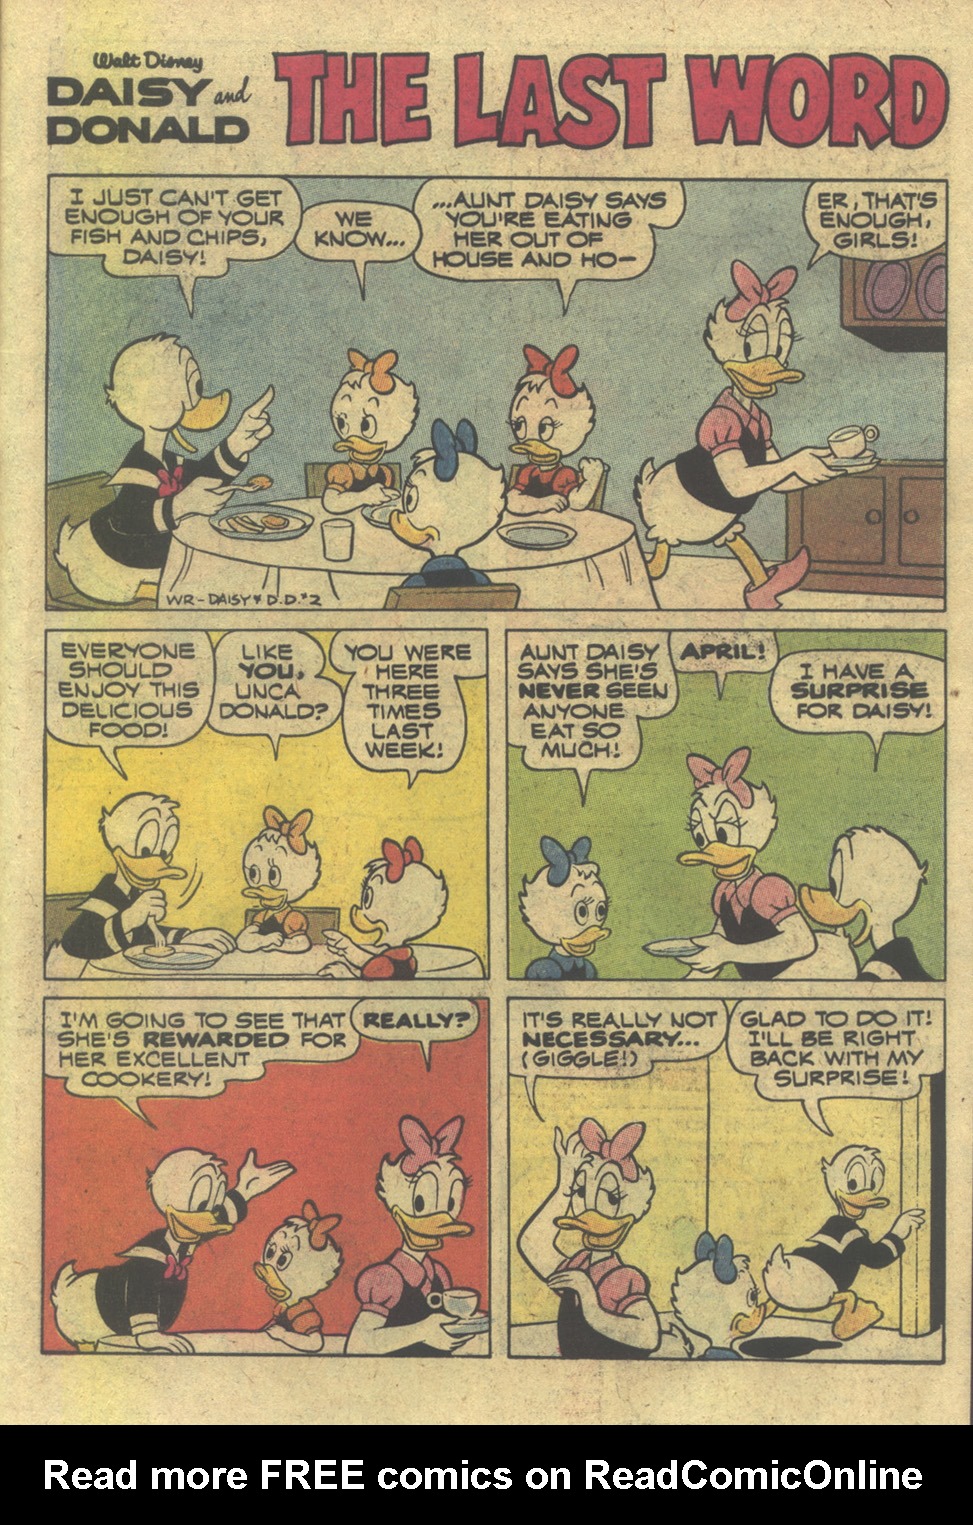 Read online Walt Disney Daisy and Donald comic -  Issue #52 - 27